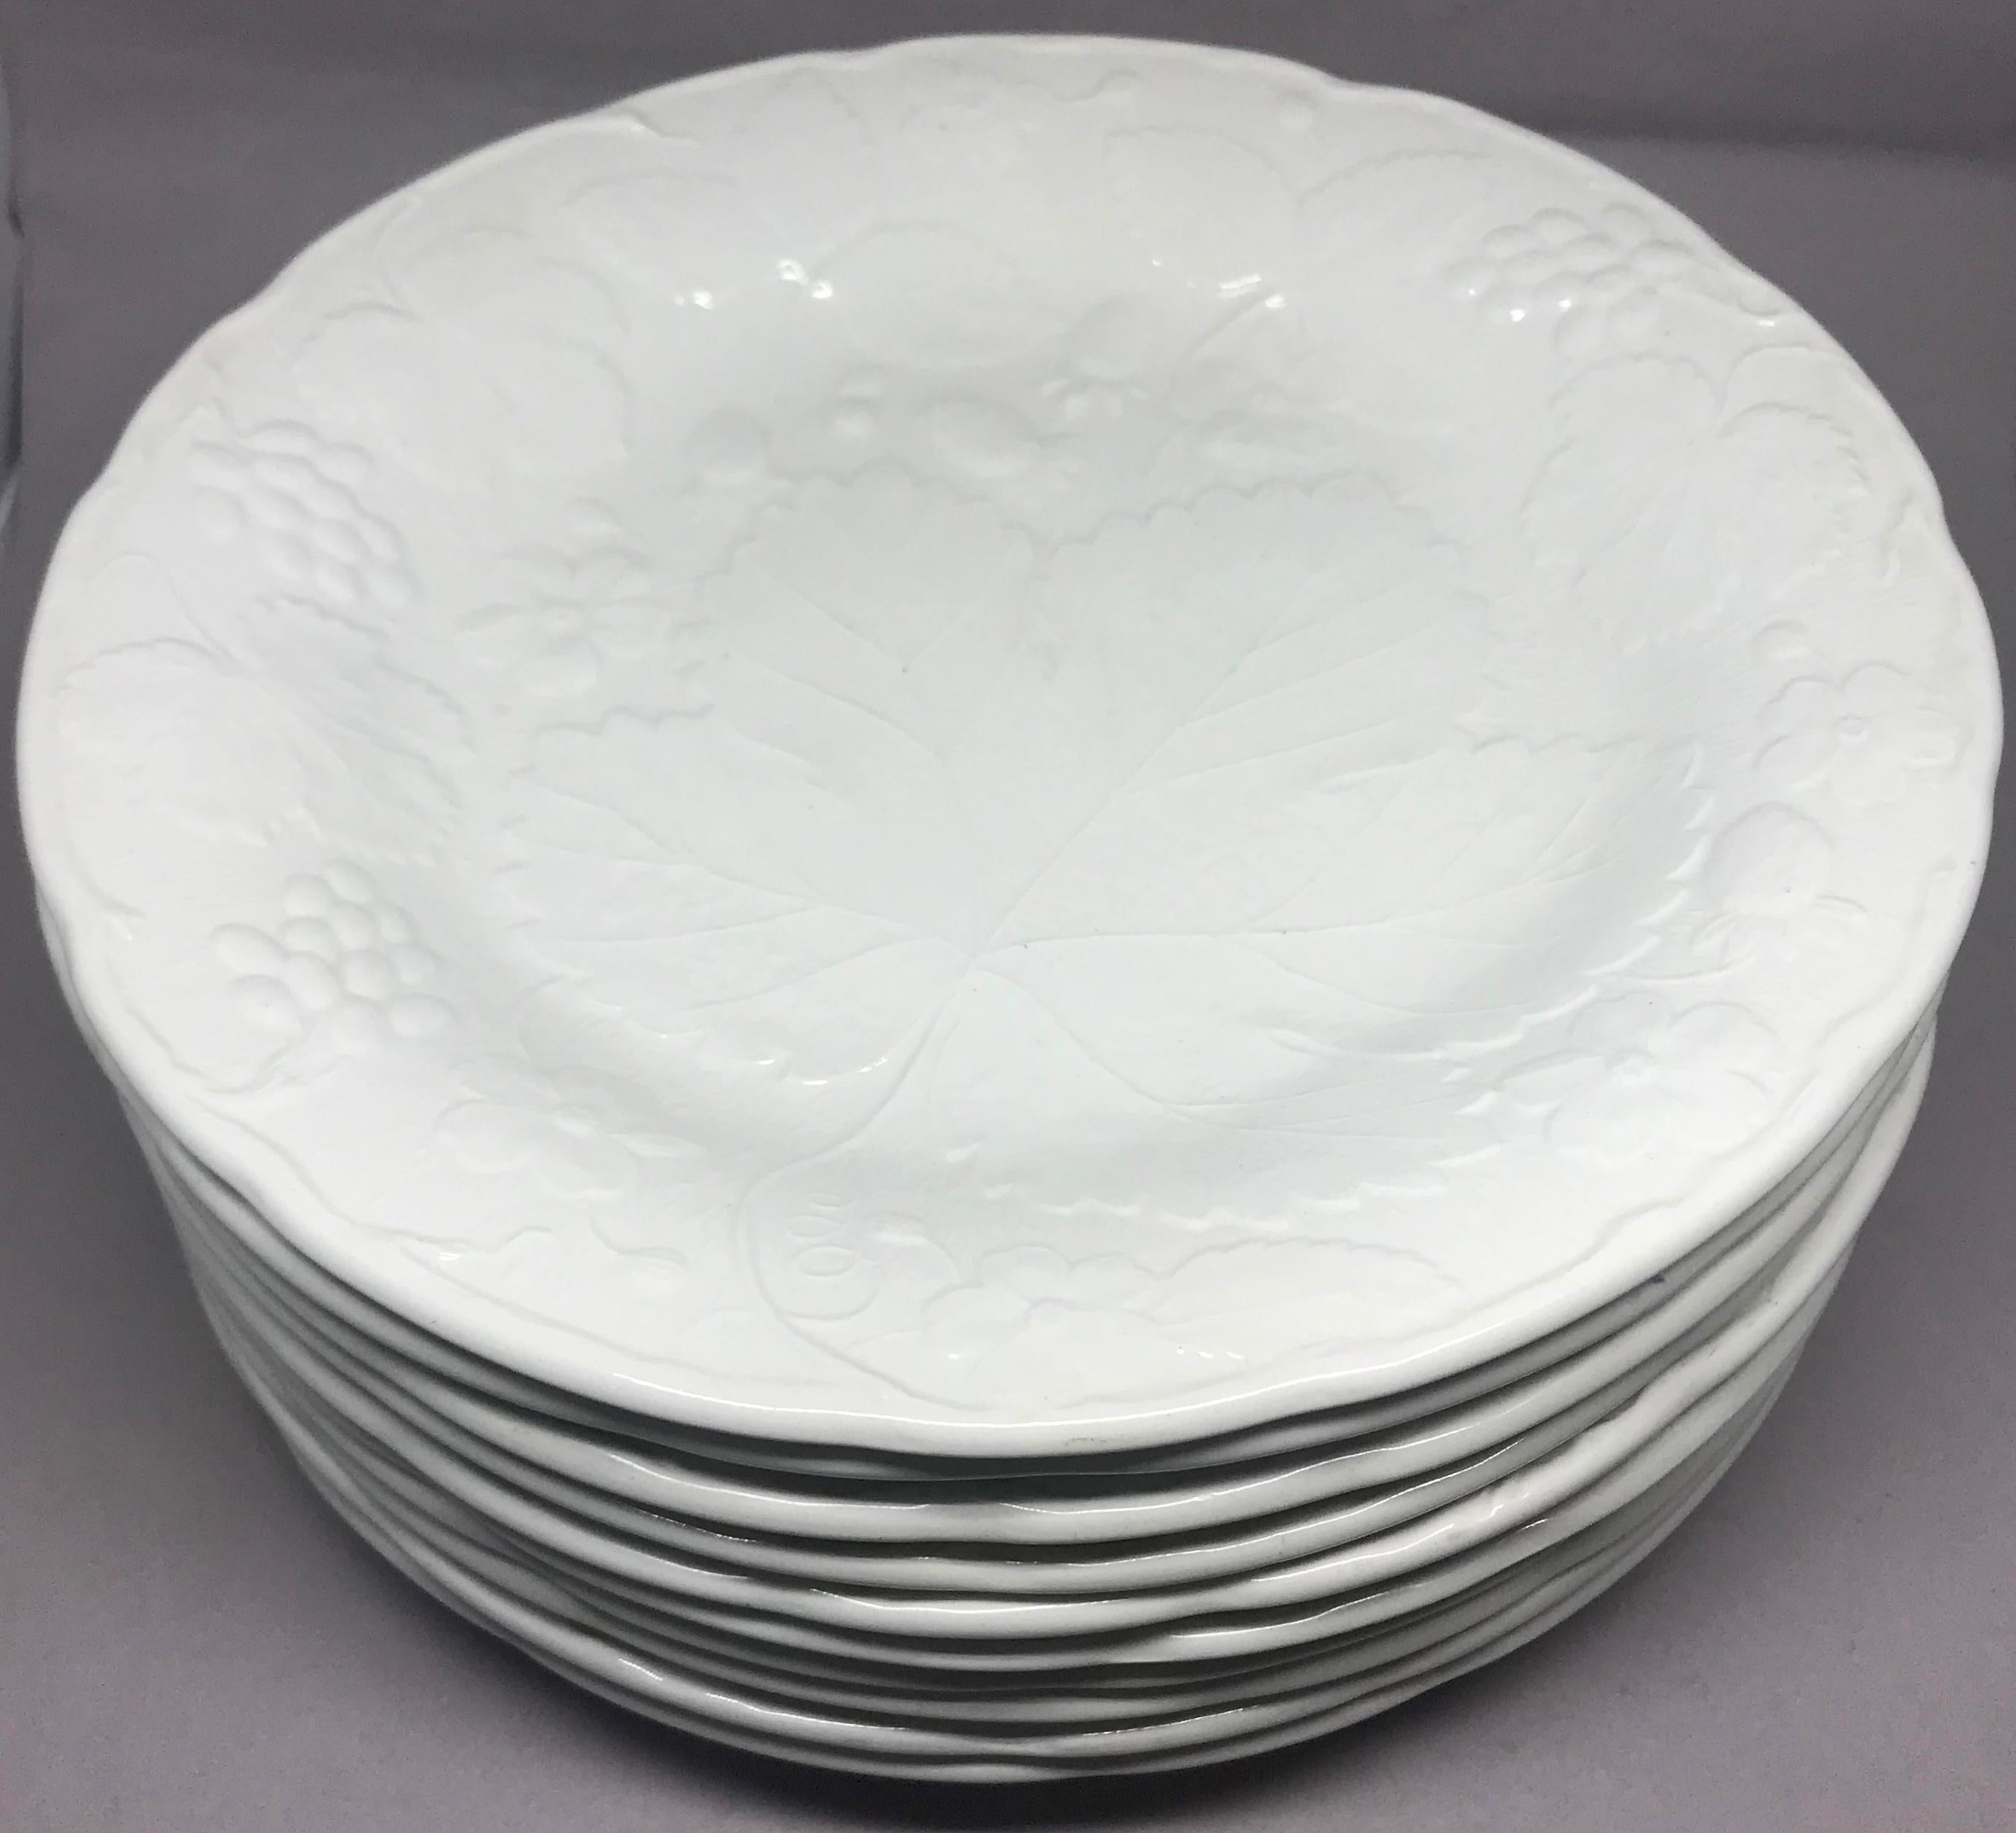 Set of ten white strawberry leaf dinner plates. Davenport Burleigh dinner plates in the strawberry and grape leaf pattern, England, 20th century.
Dinner plate dimensions: 9.88